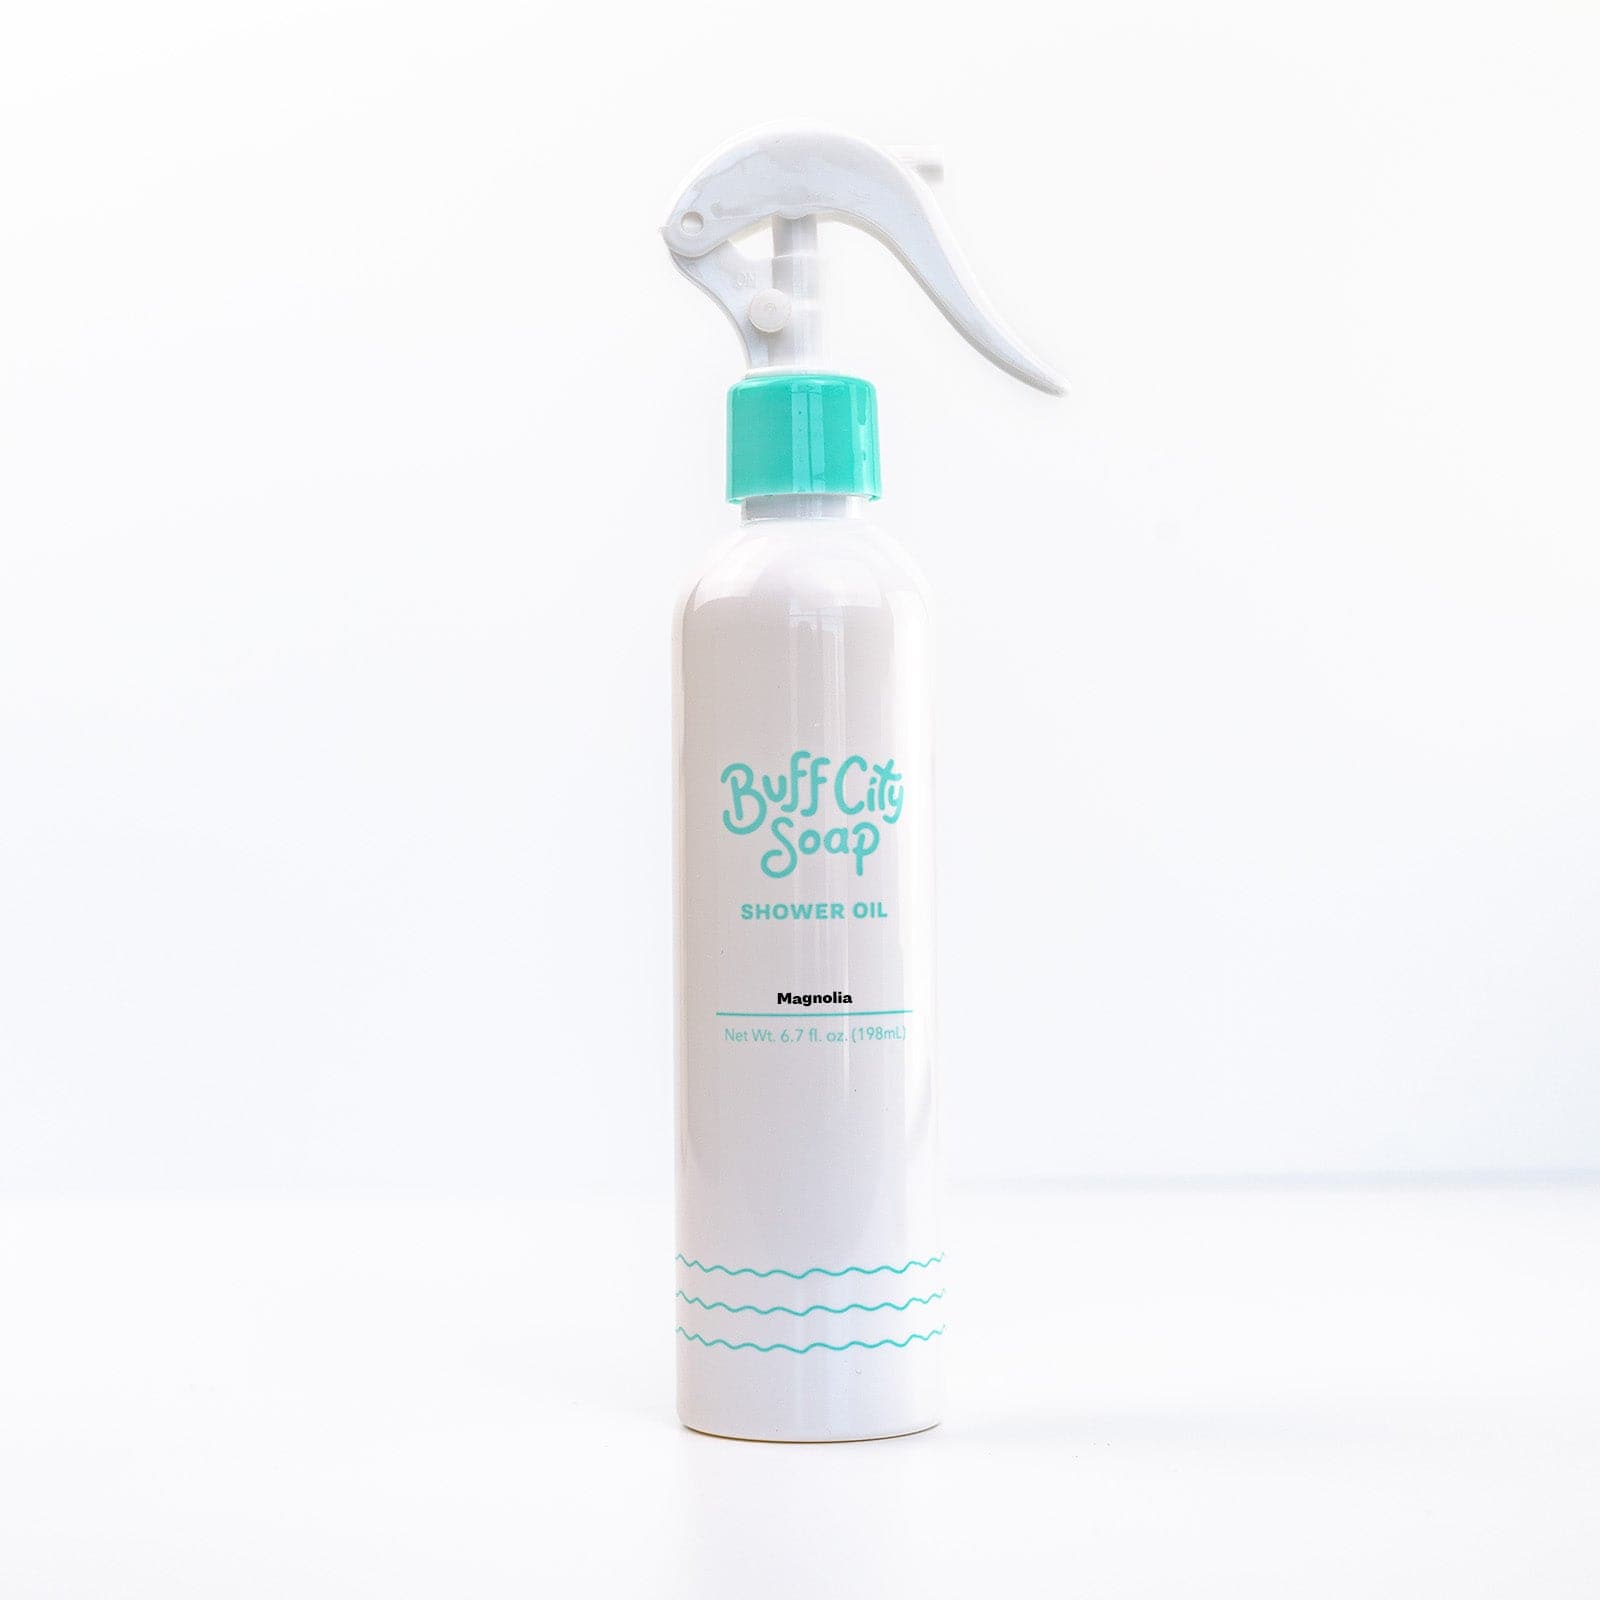 Magnolia Shower Oil spray bottle with teal finishes against white background